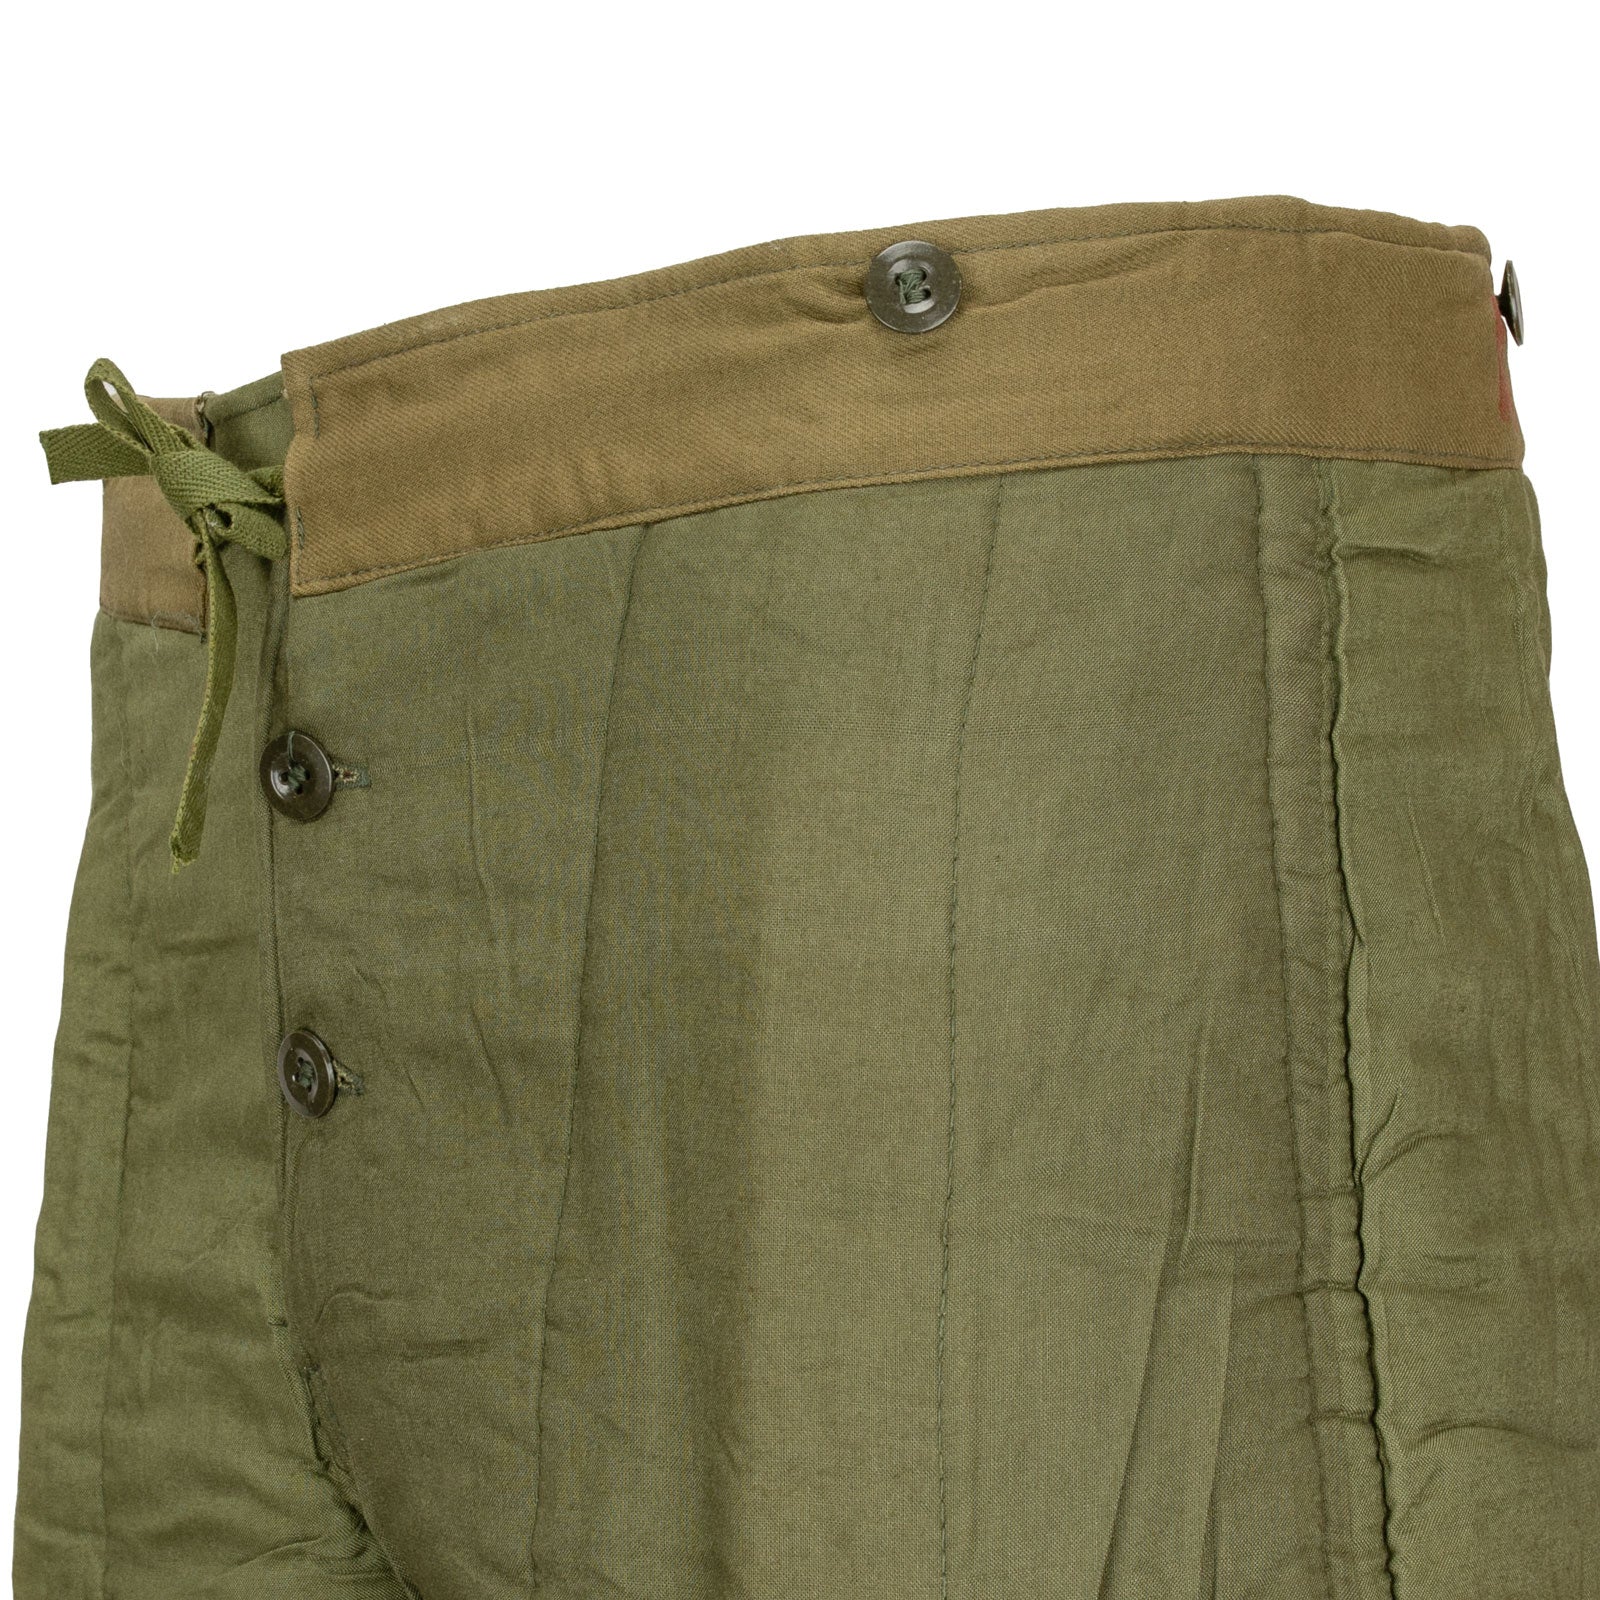 Czech Army Pant Liner